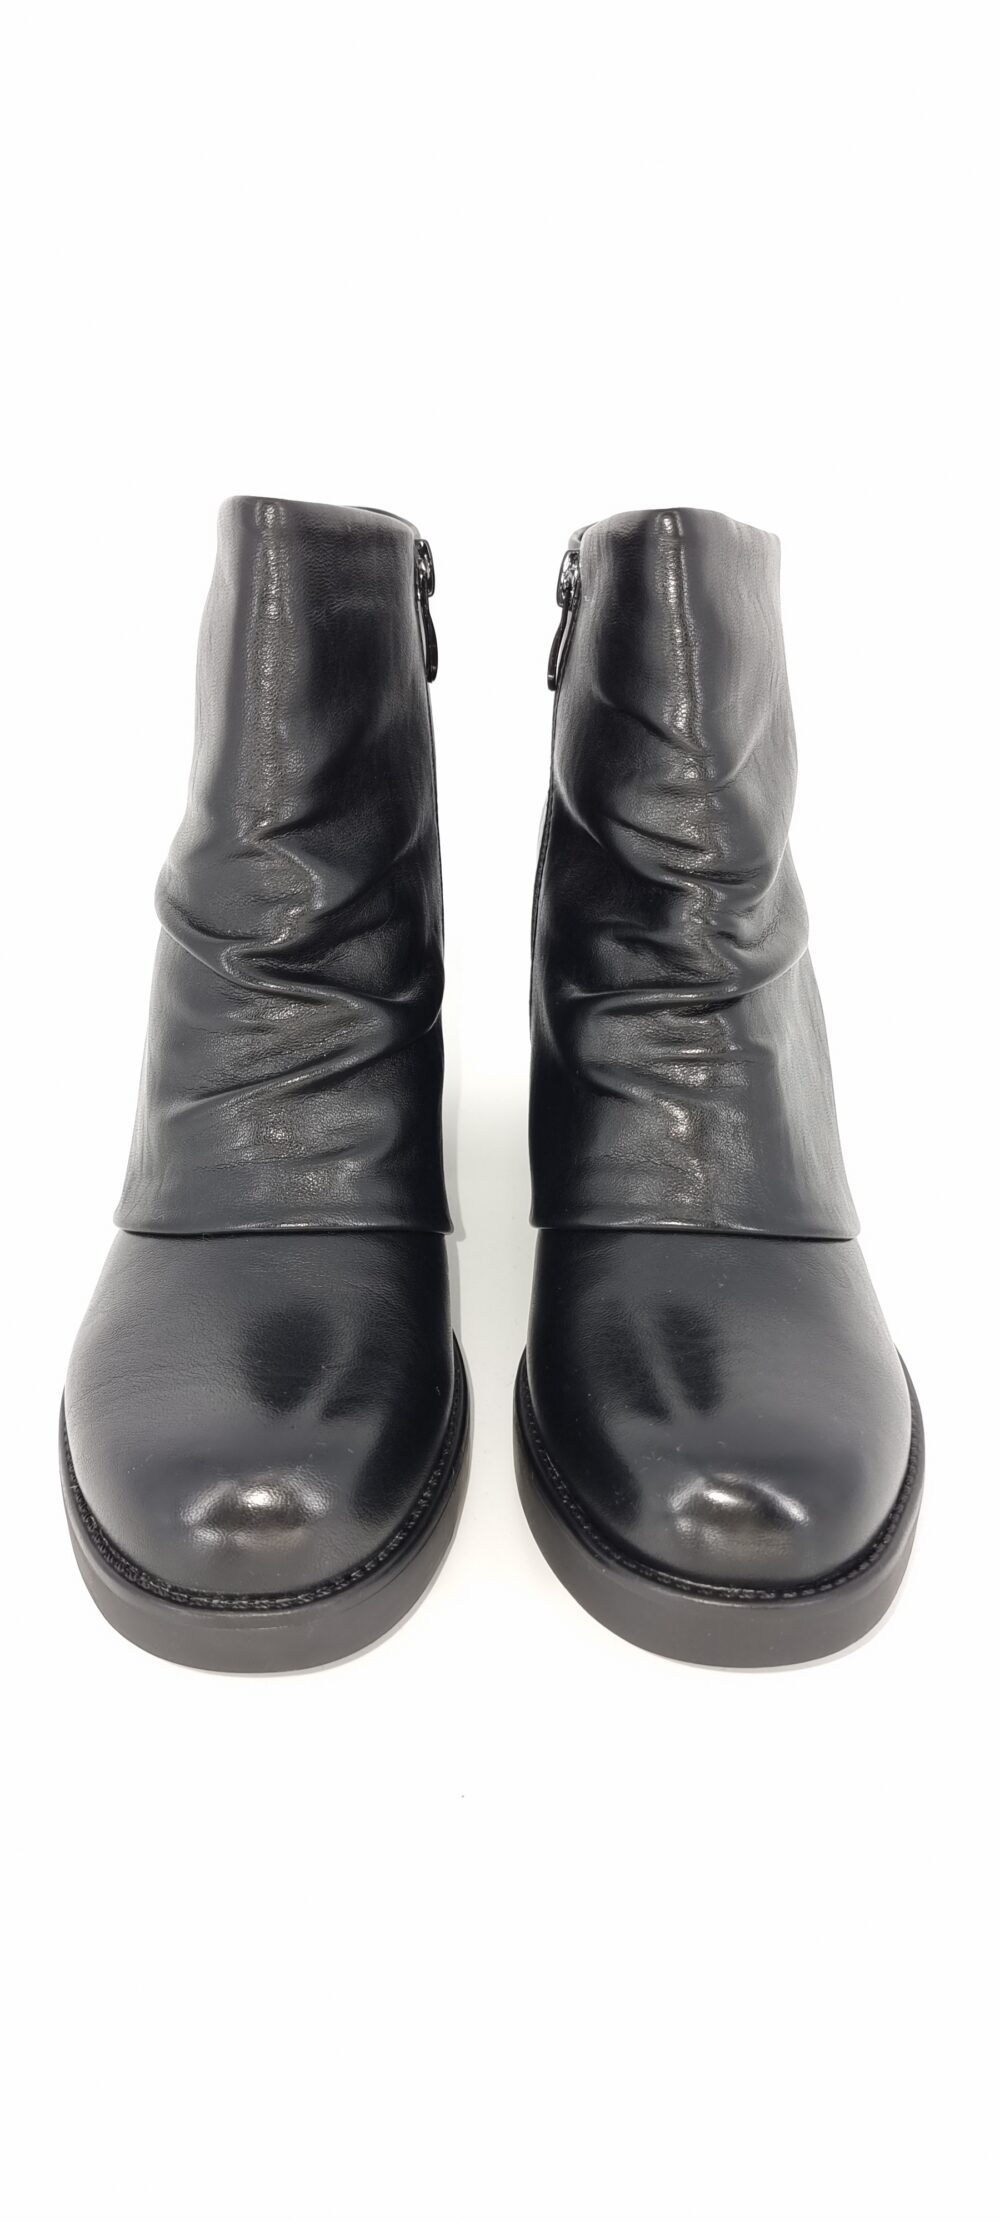 Round toe boot and low thick heel black